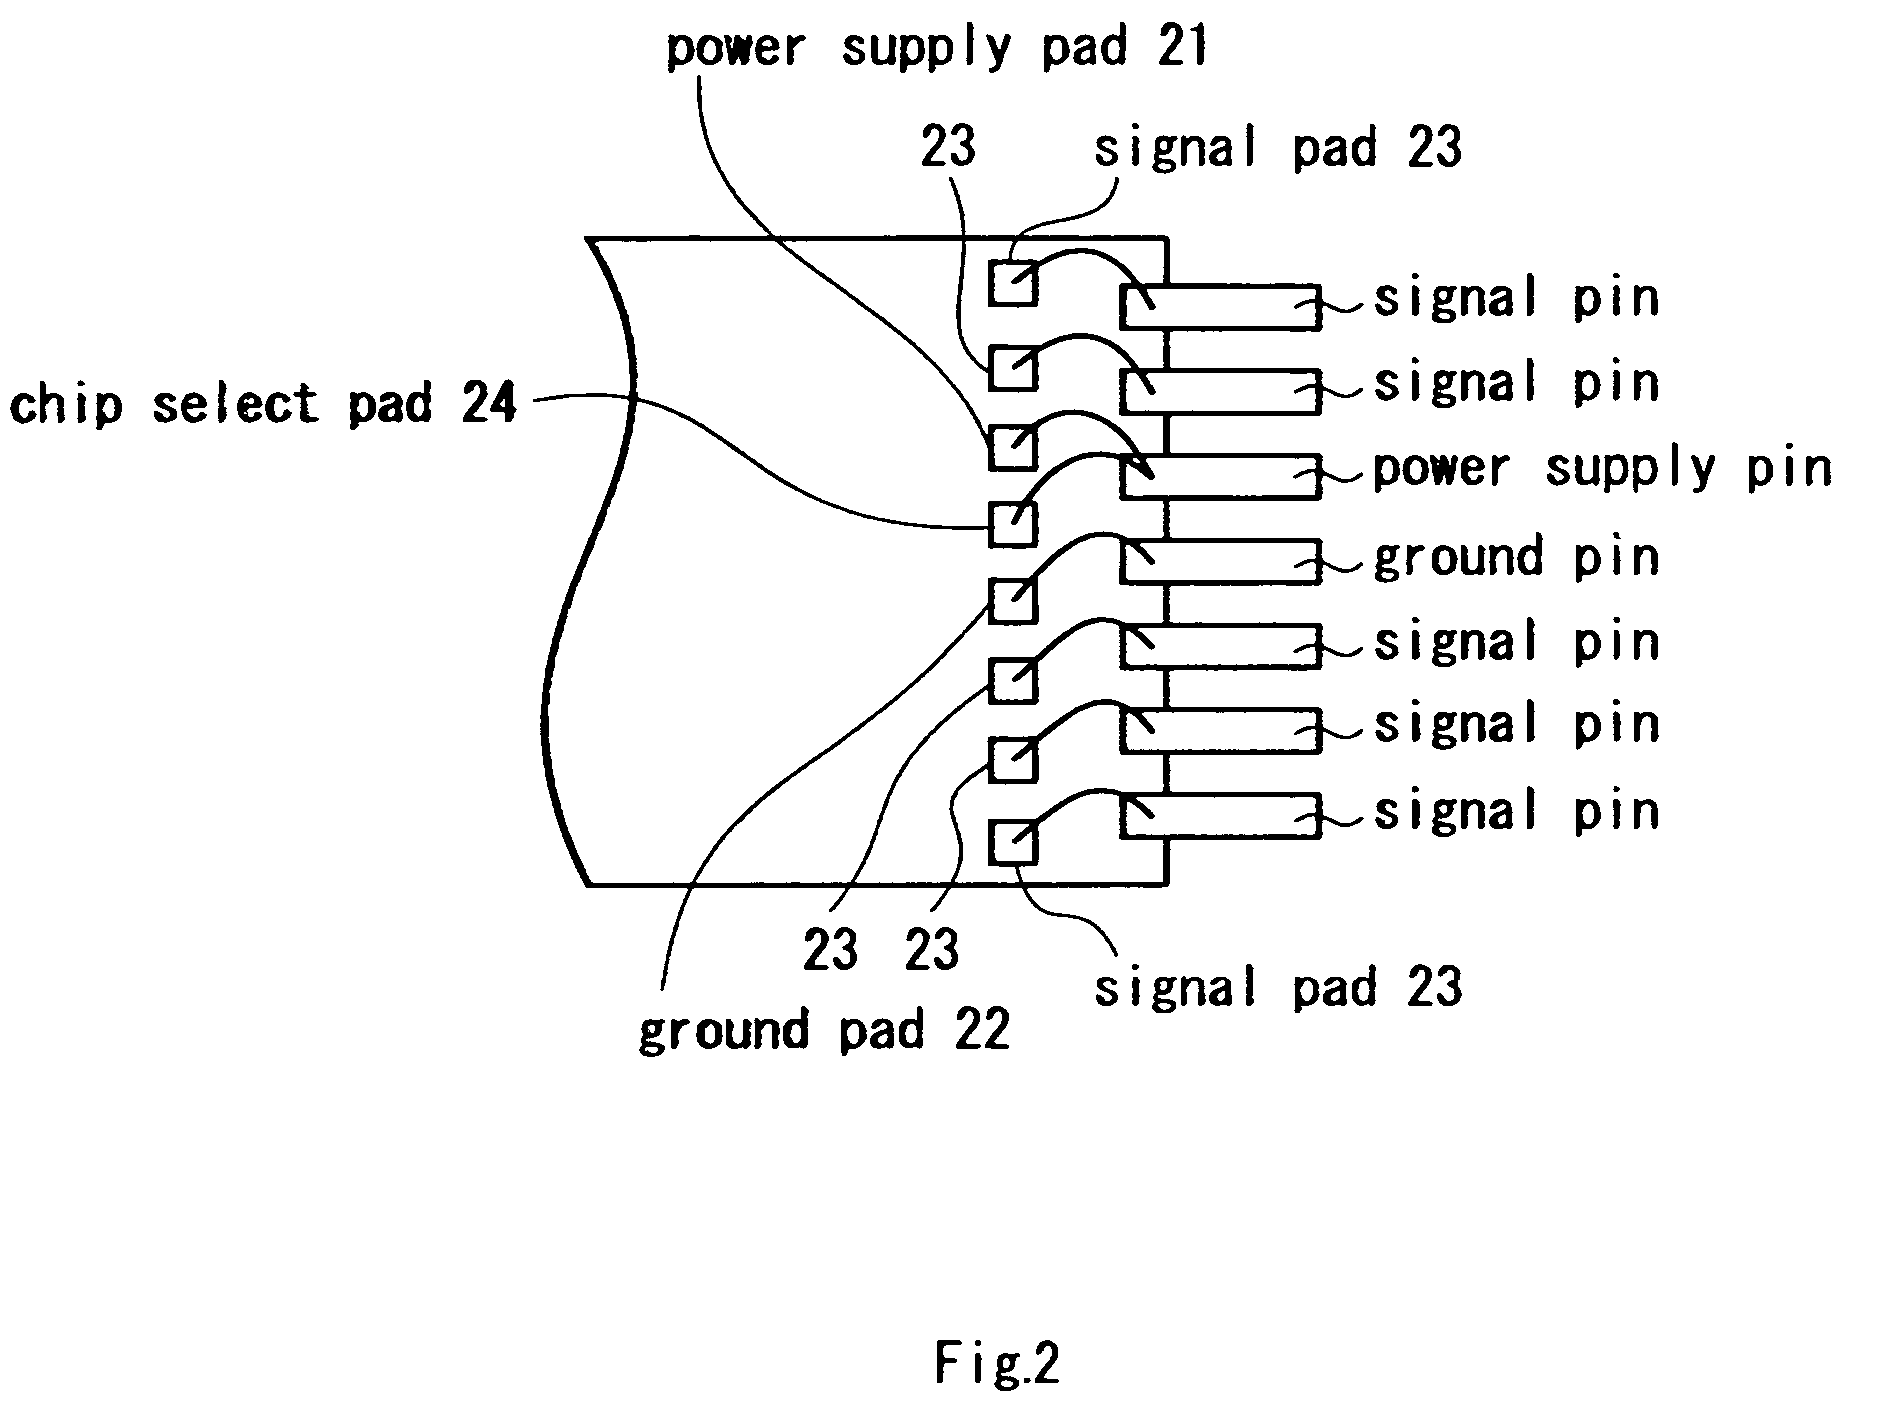 Multi chip package type memory system and a replacement method of replacing a defect therein